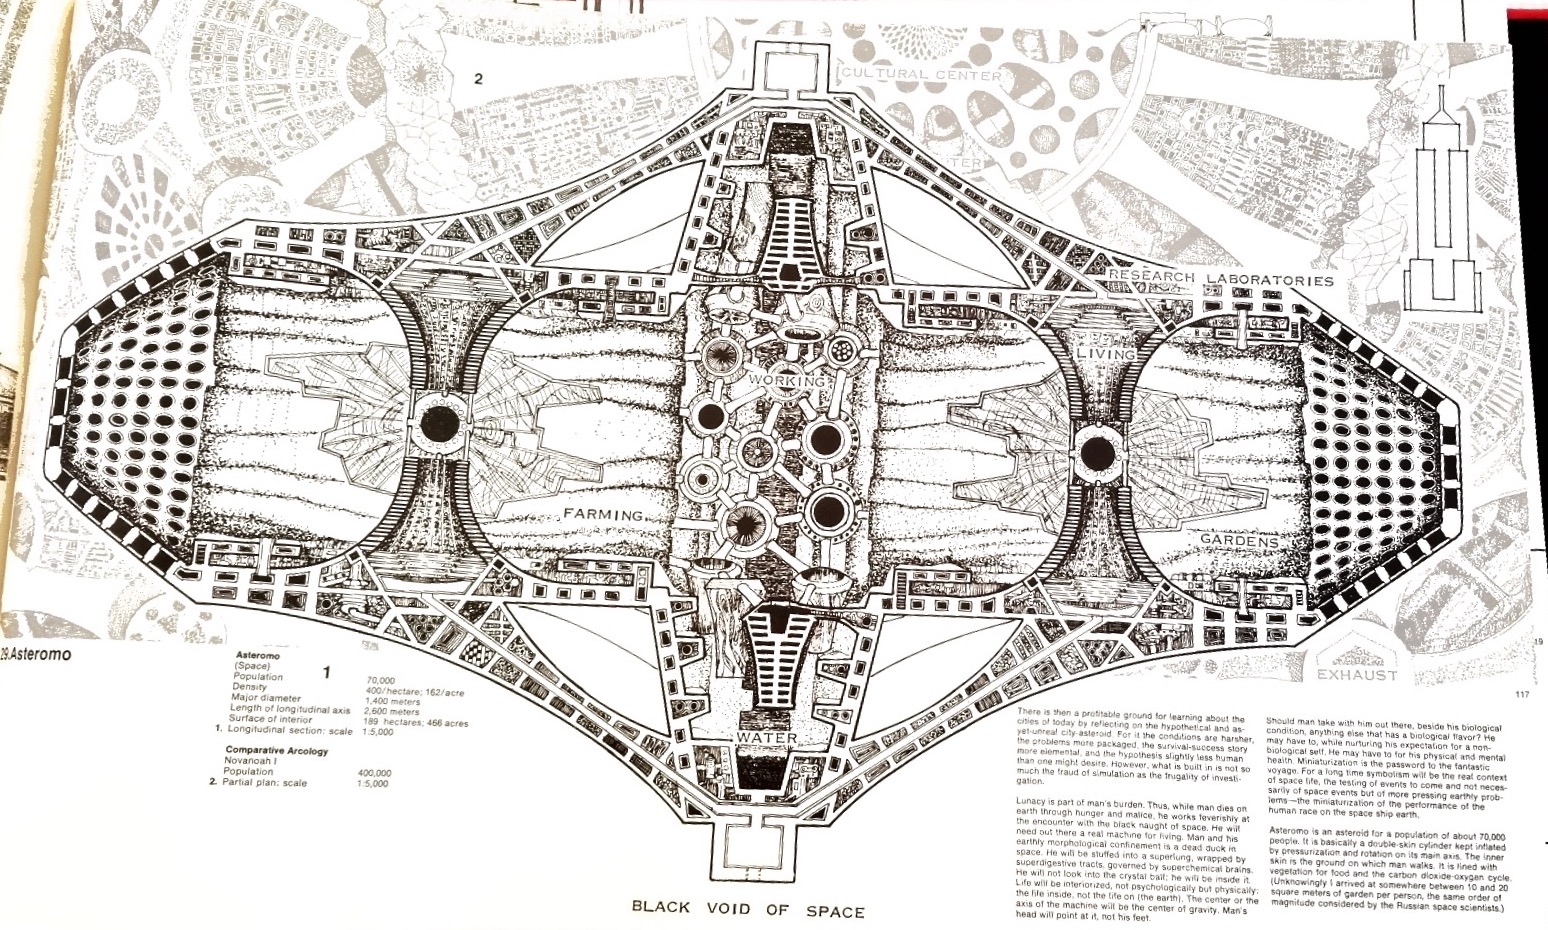 The design for Asteromo, an arcology in space. Author's scan from Arcology: The City in the Image of Man